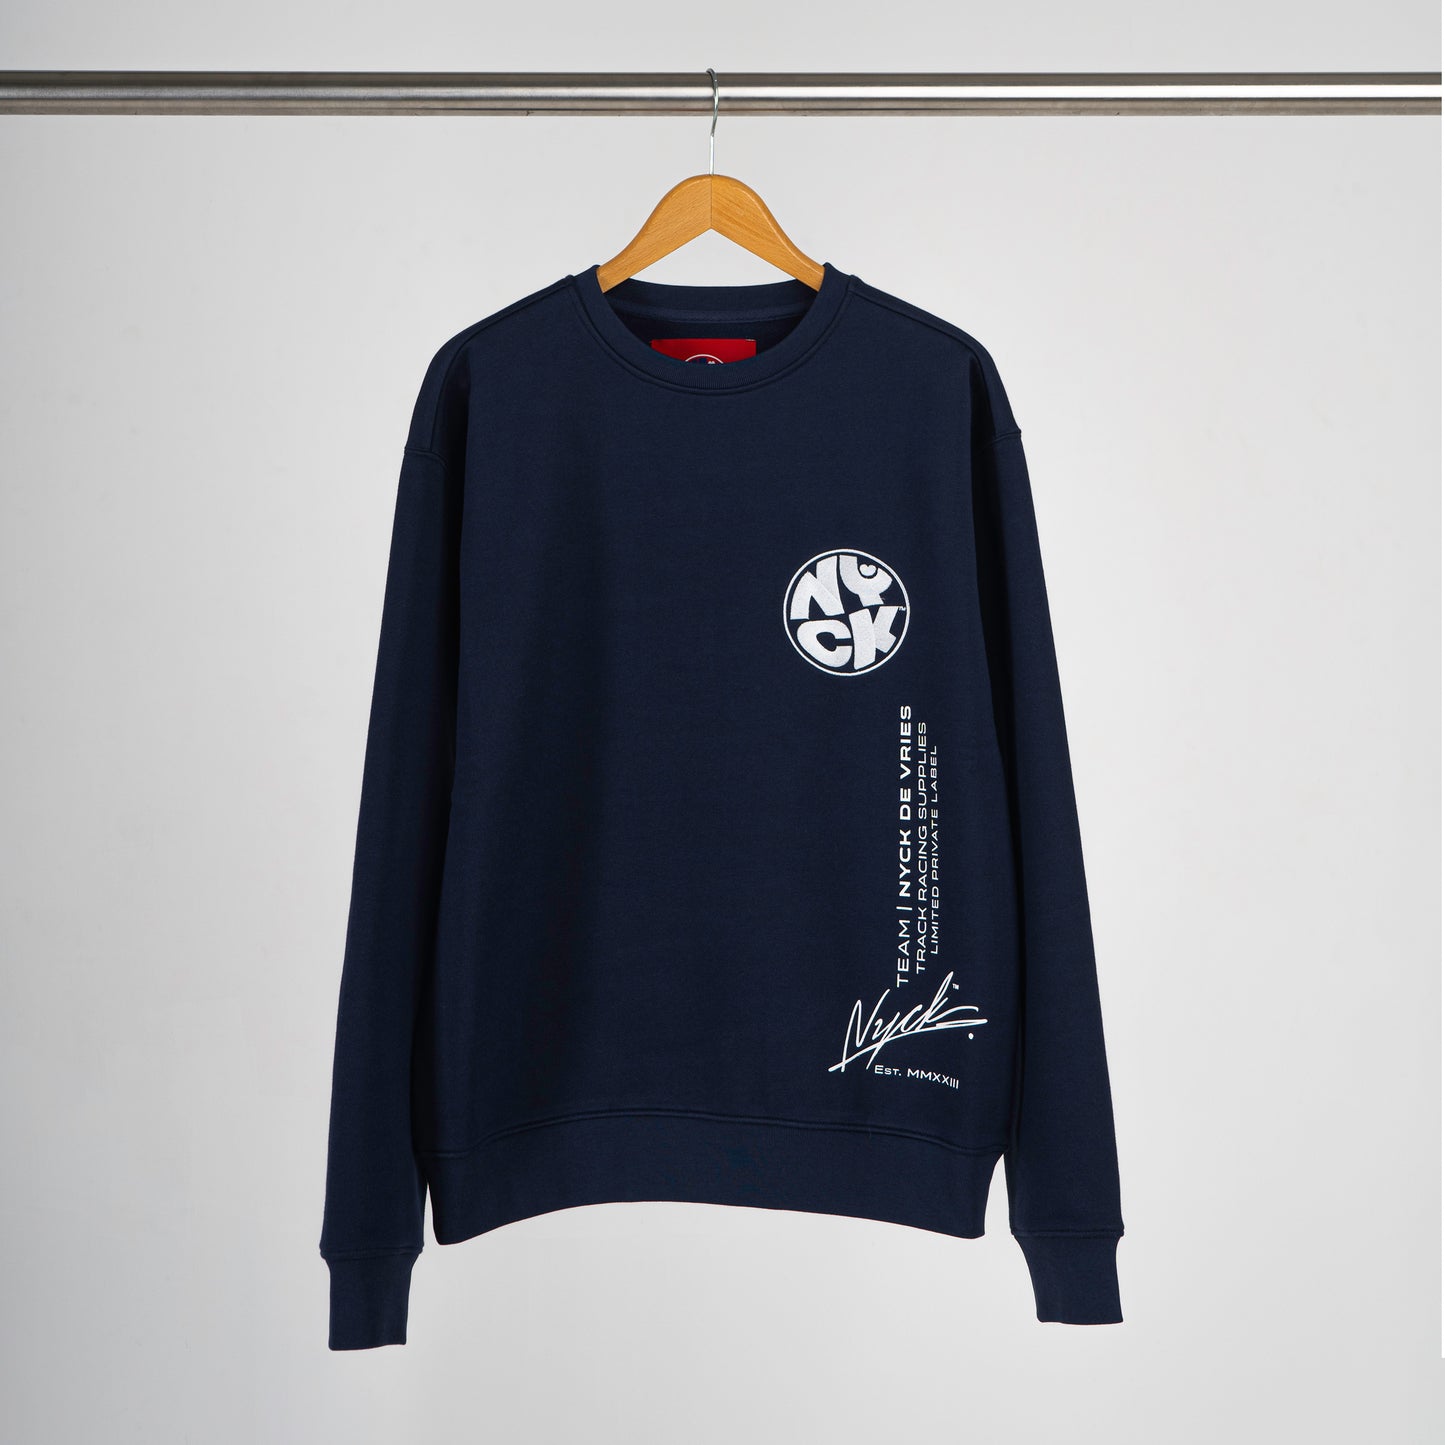 The official NYCK navy sweater